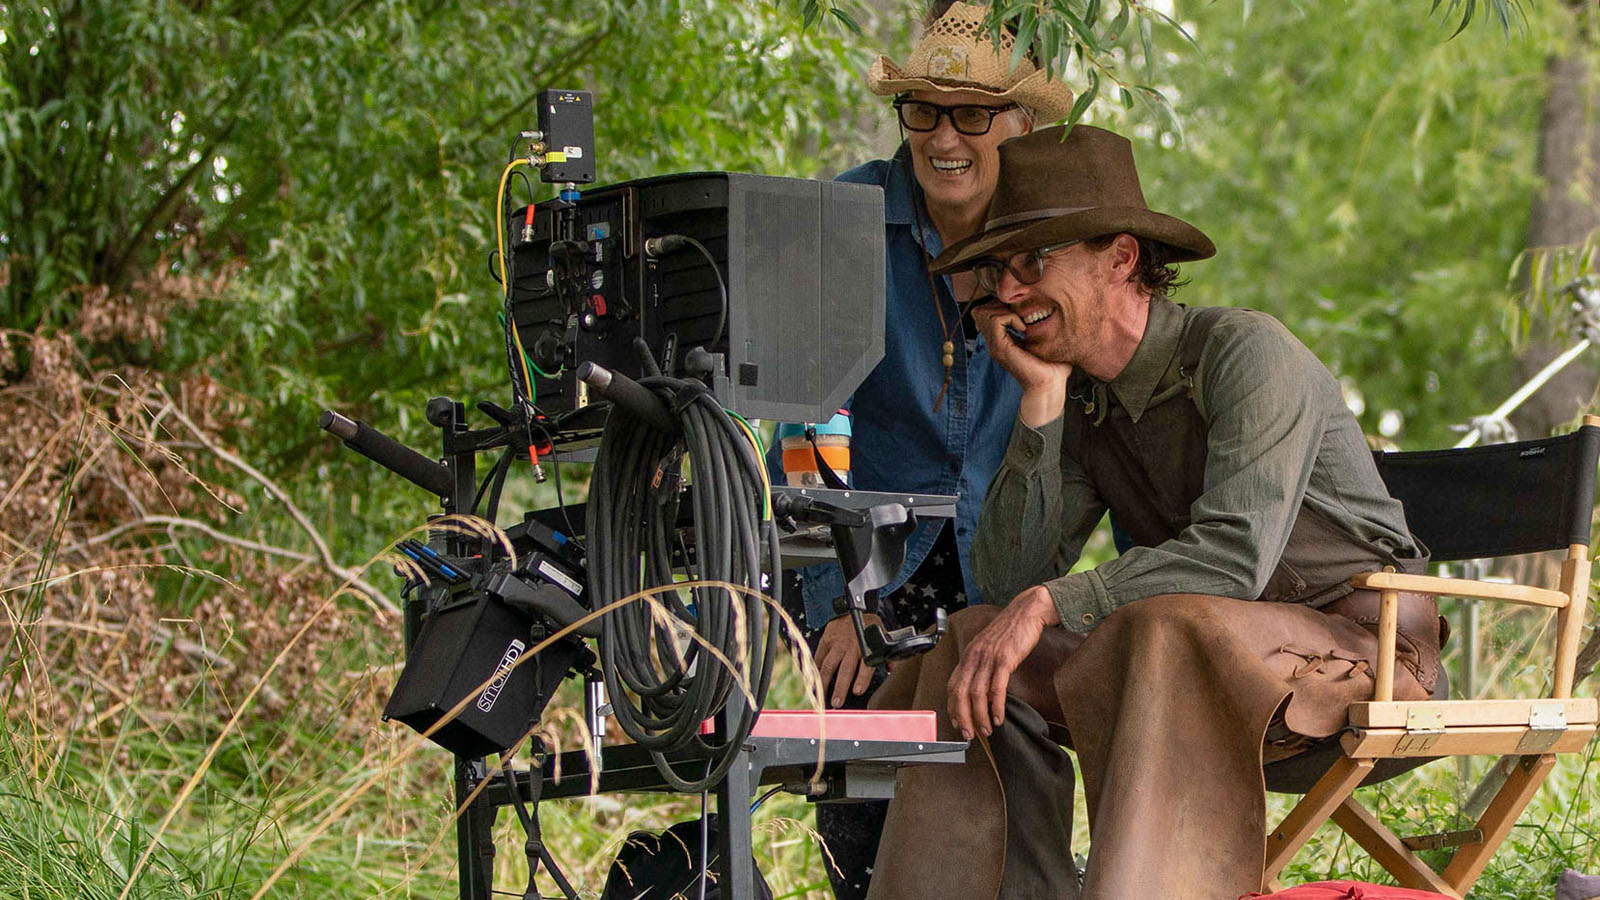 Campion and Cumberbatch watch playback during filming of The Power of the Dog. Image © Netflix